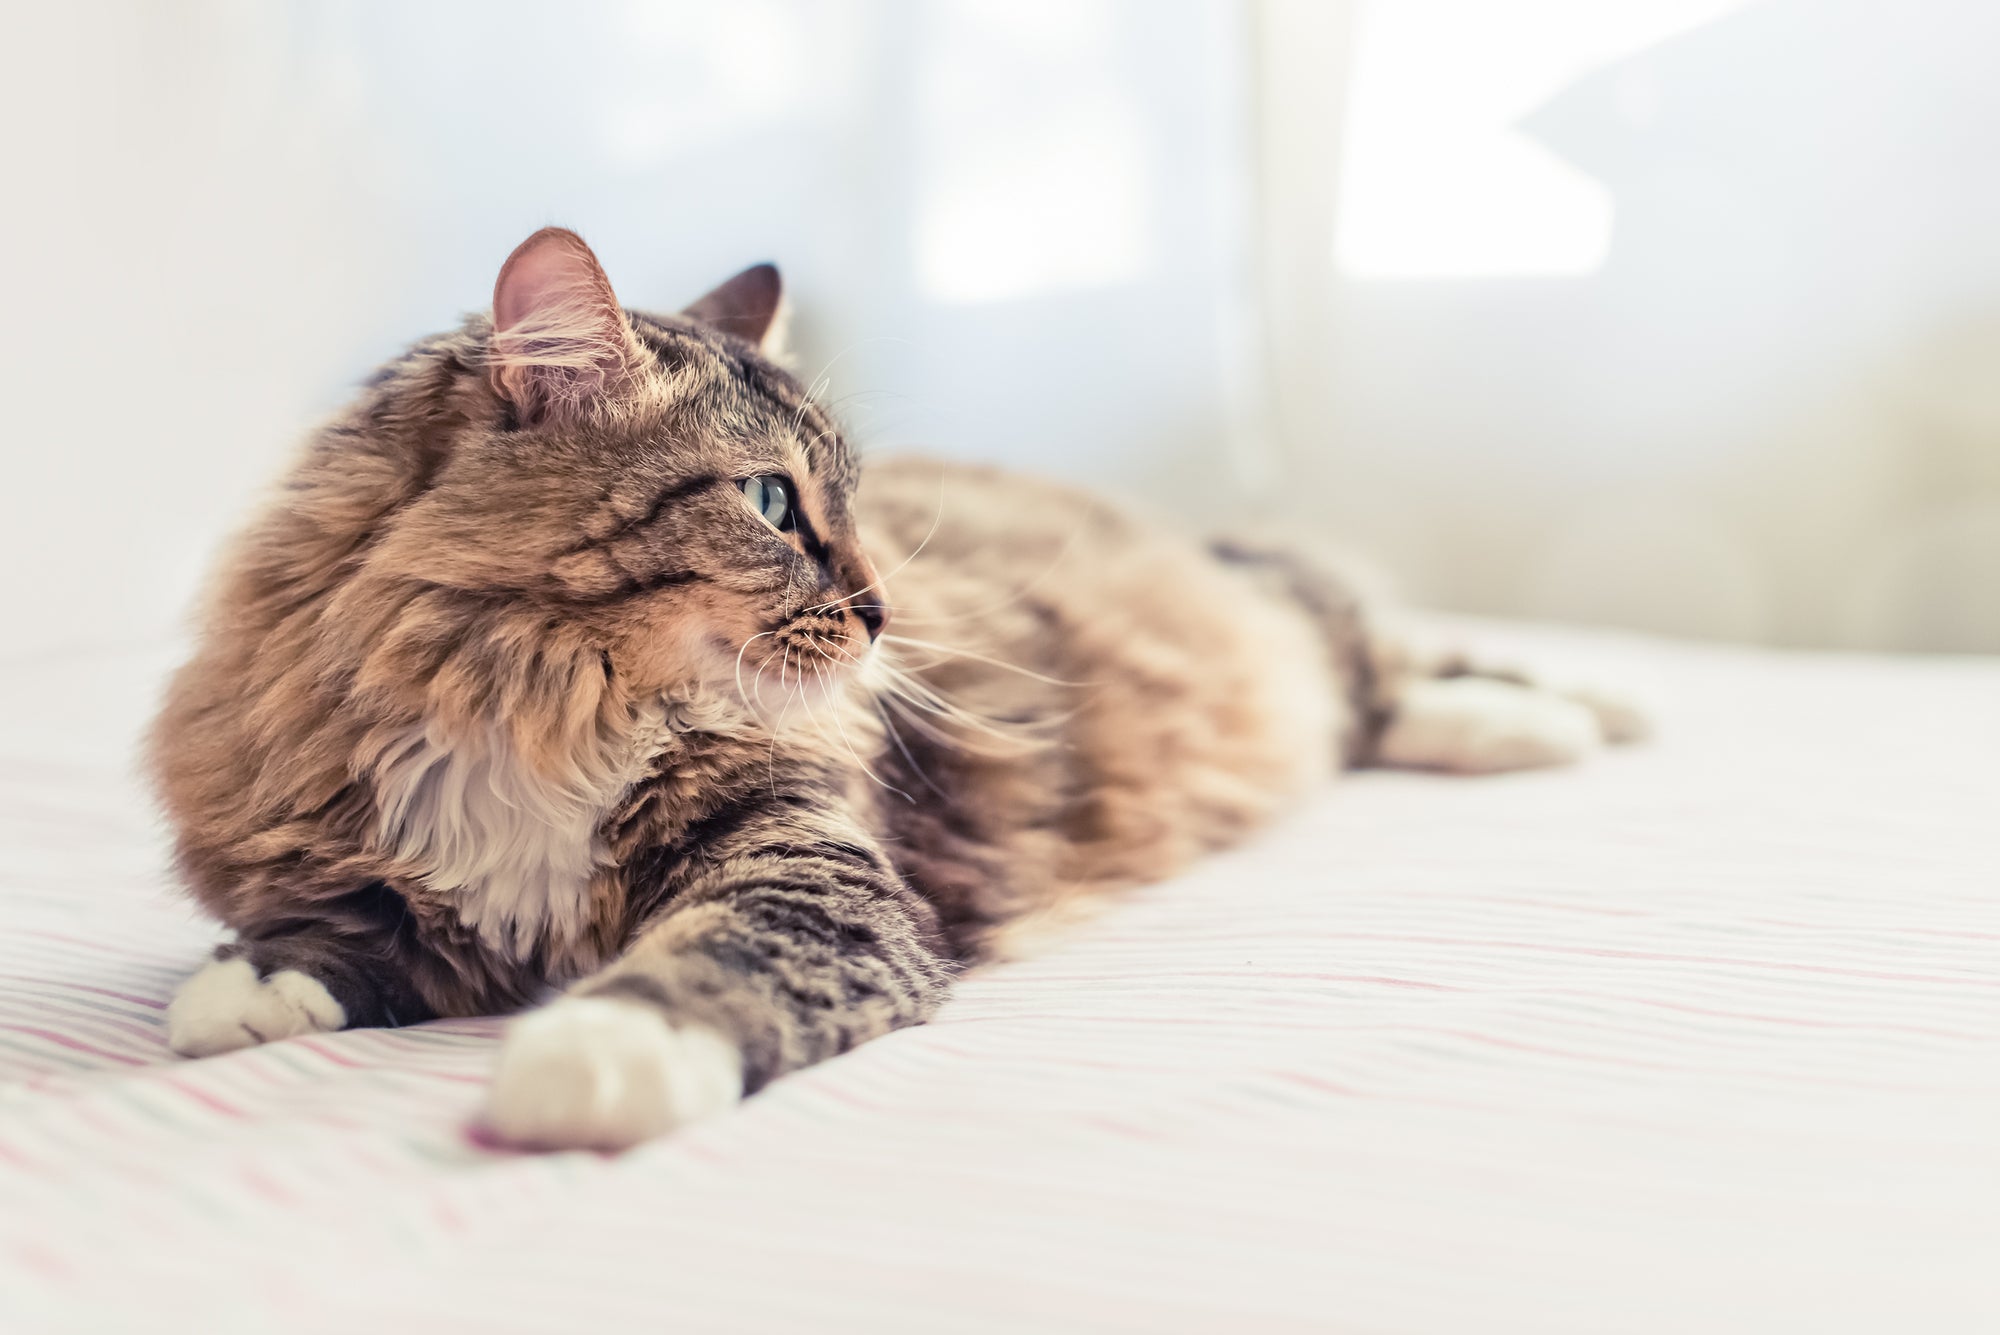 What to feed an older cat that is losing weight